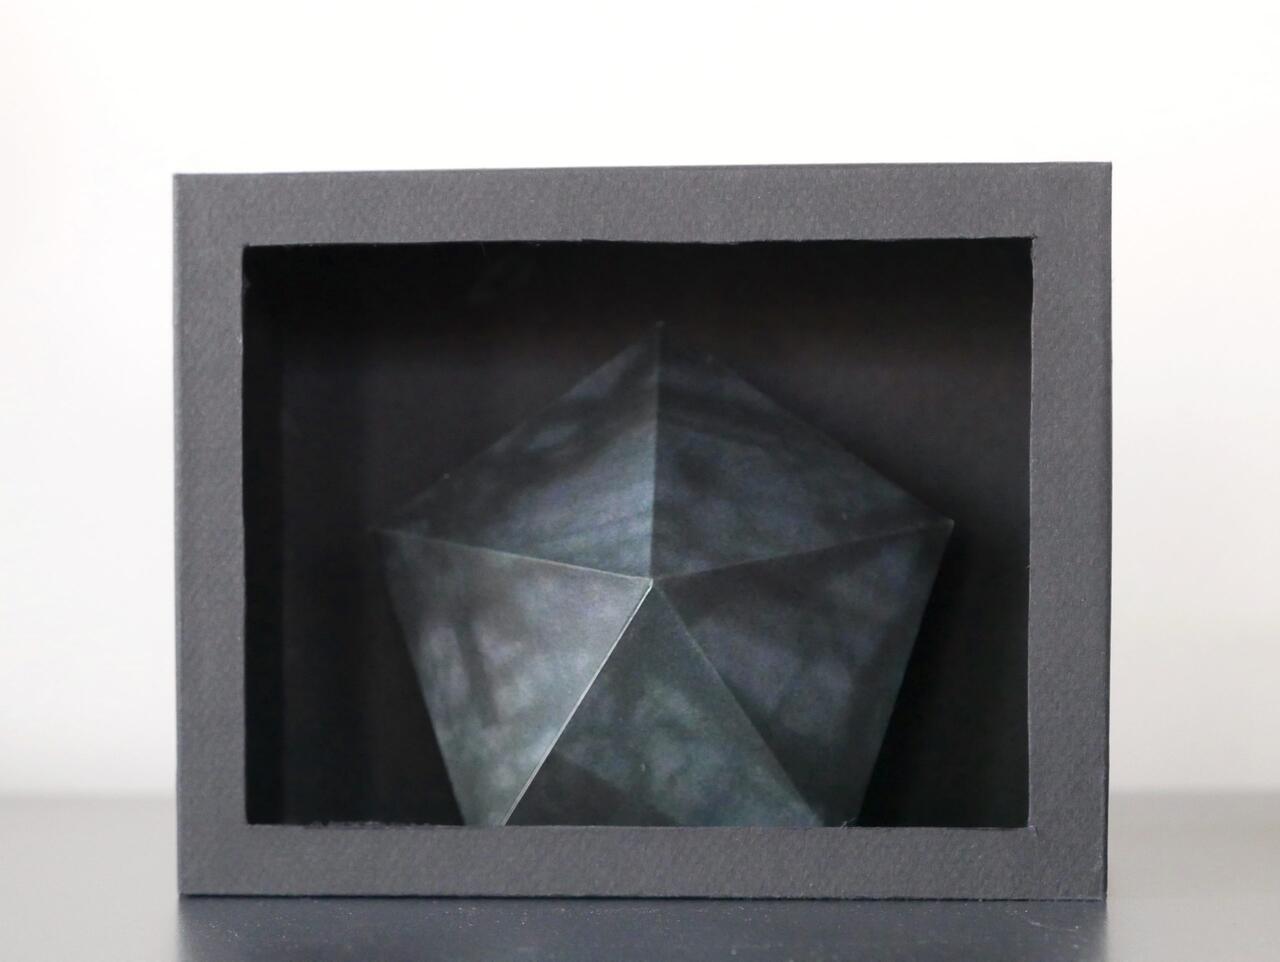 An image of a gray box with a dark gray textured pentagonal prism inside.